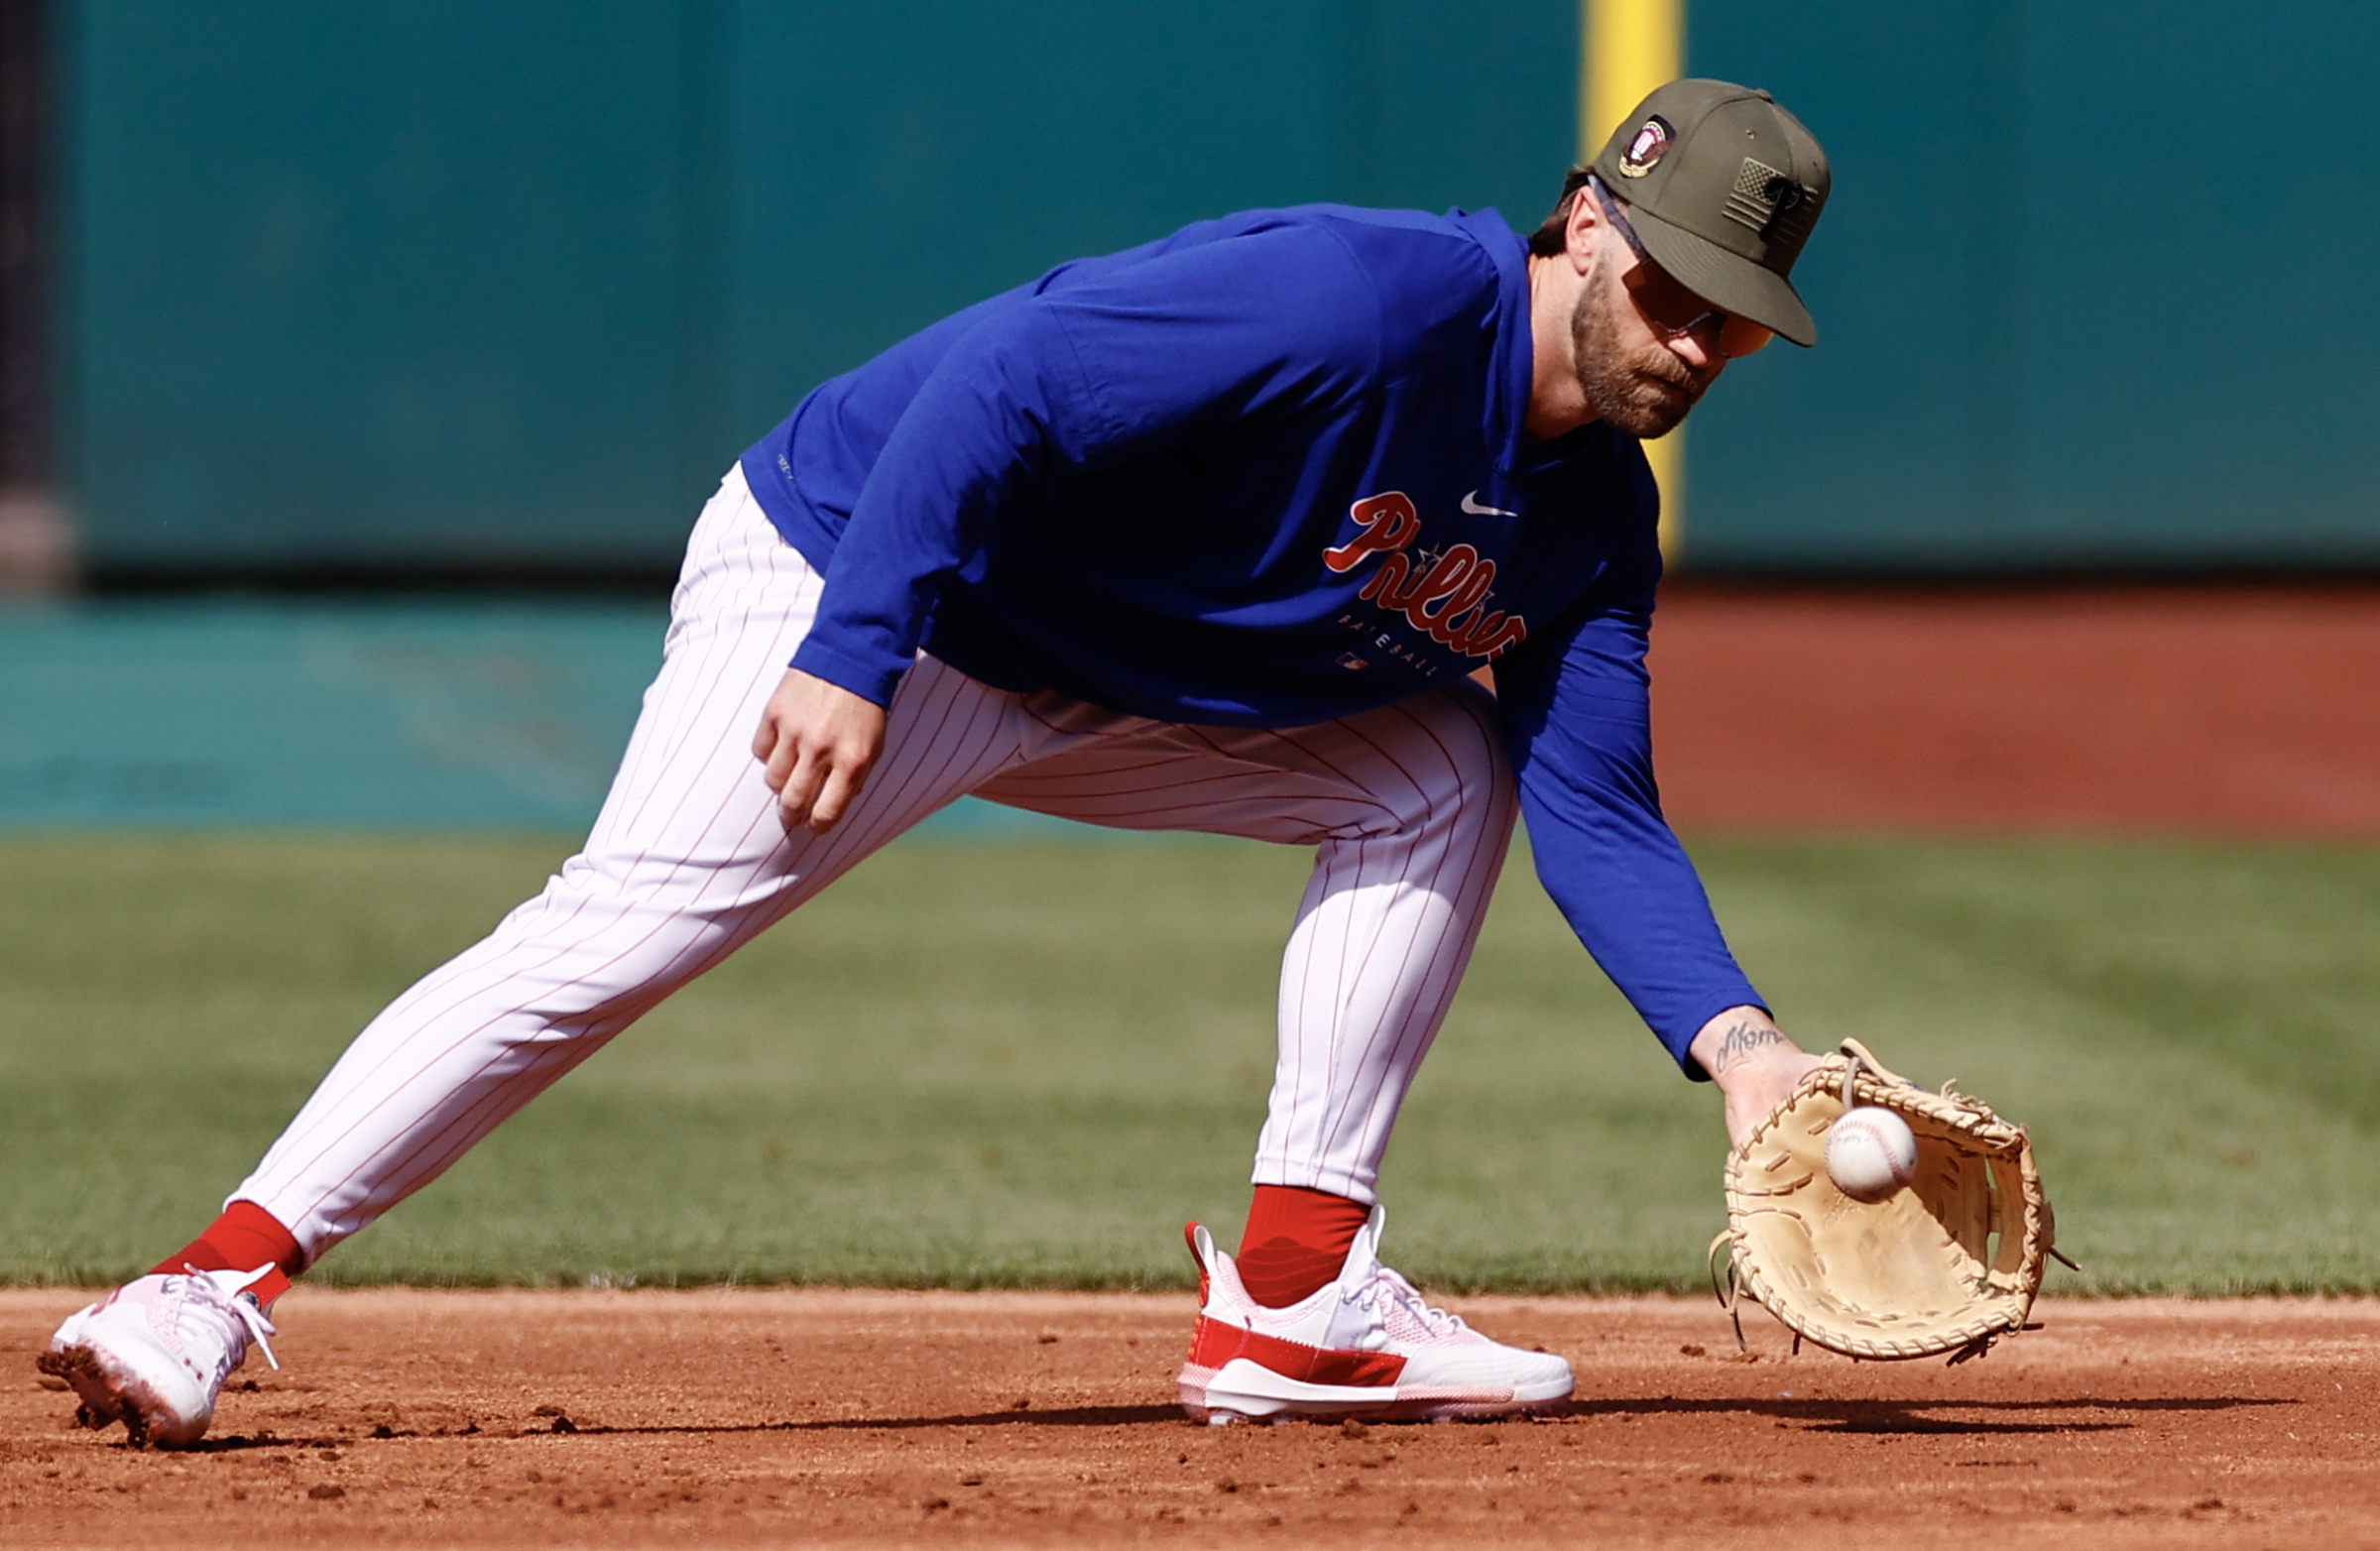 Hochman: A look at who the Cardinals should use vs. Kyle Schwarber and Bryce  Harper